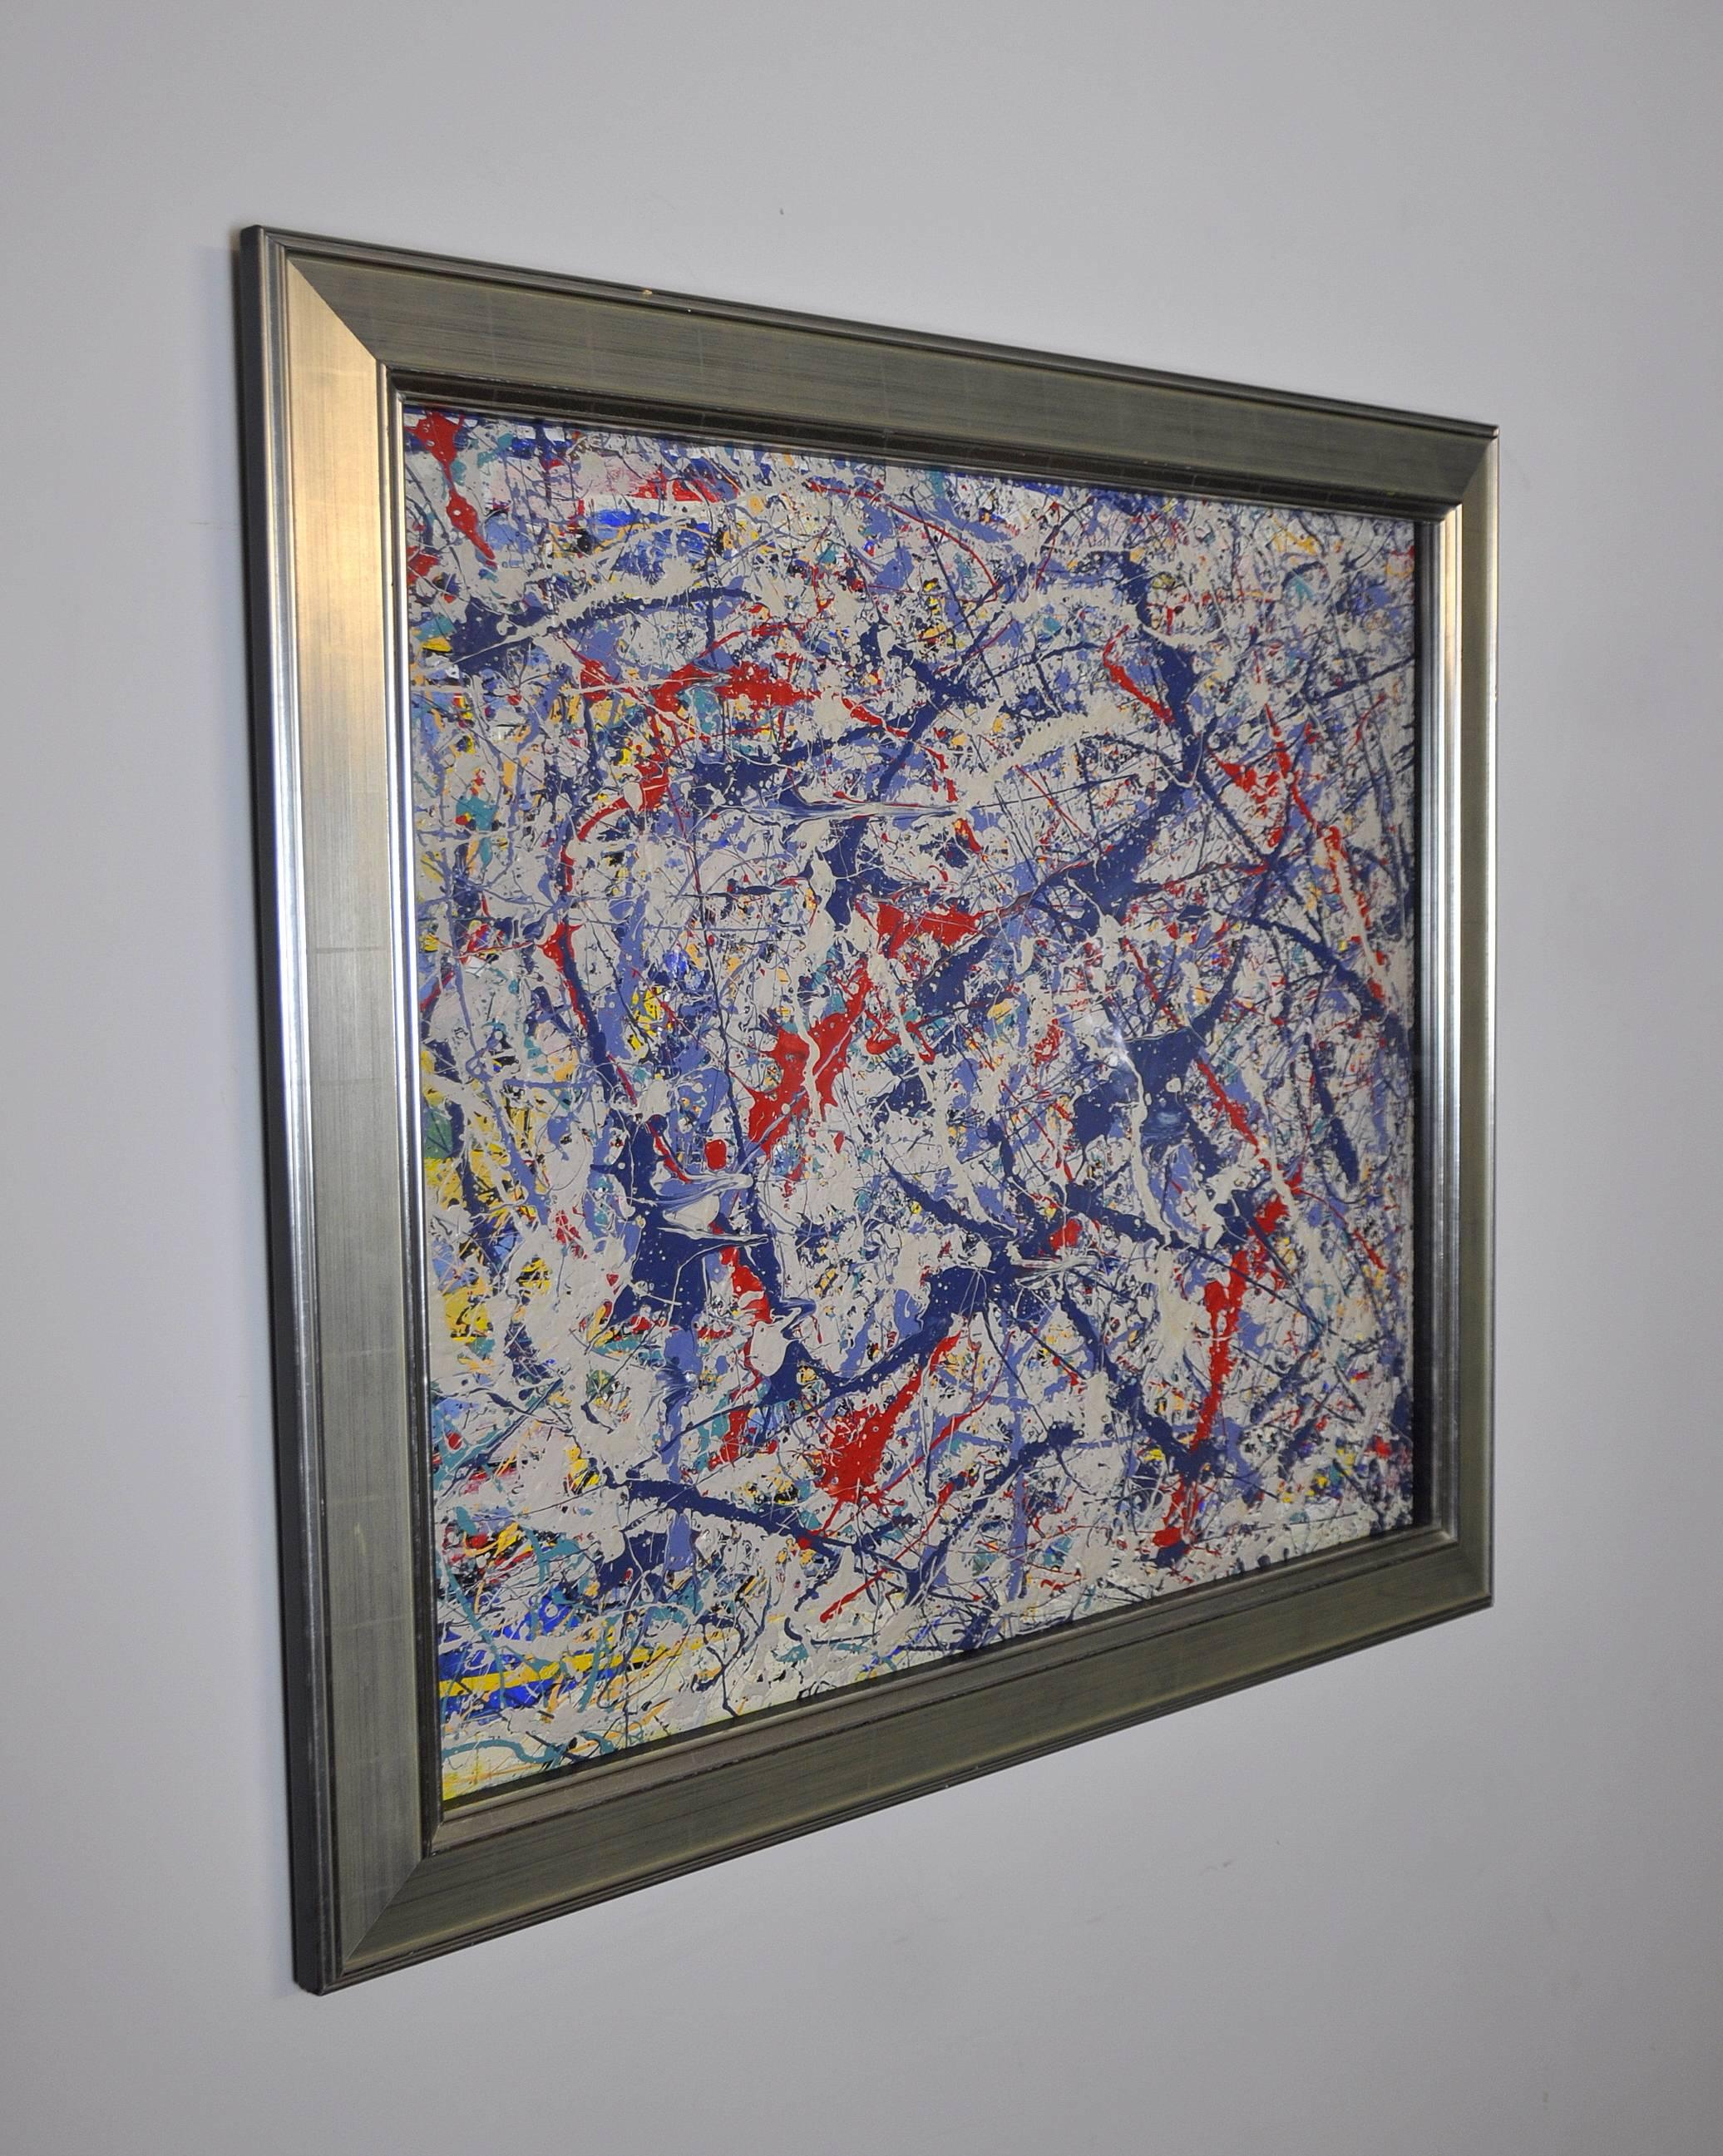 Large and decorative acrylic painting on art illustration board by contemporary artist John Frates (B.1943). Inspired by Jackson Pollock and painted in the midcentury abstract Expressionist style, the work of art exhibits vivid dark blue and red